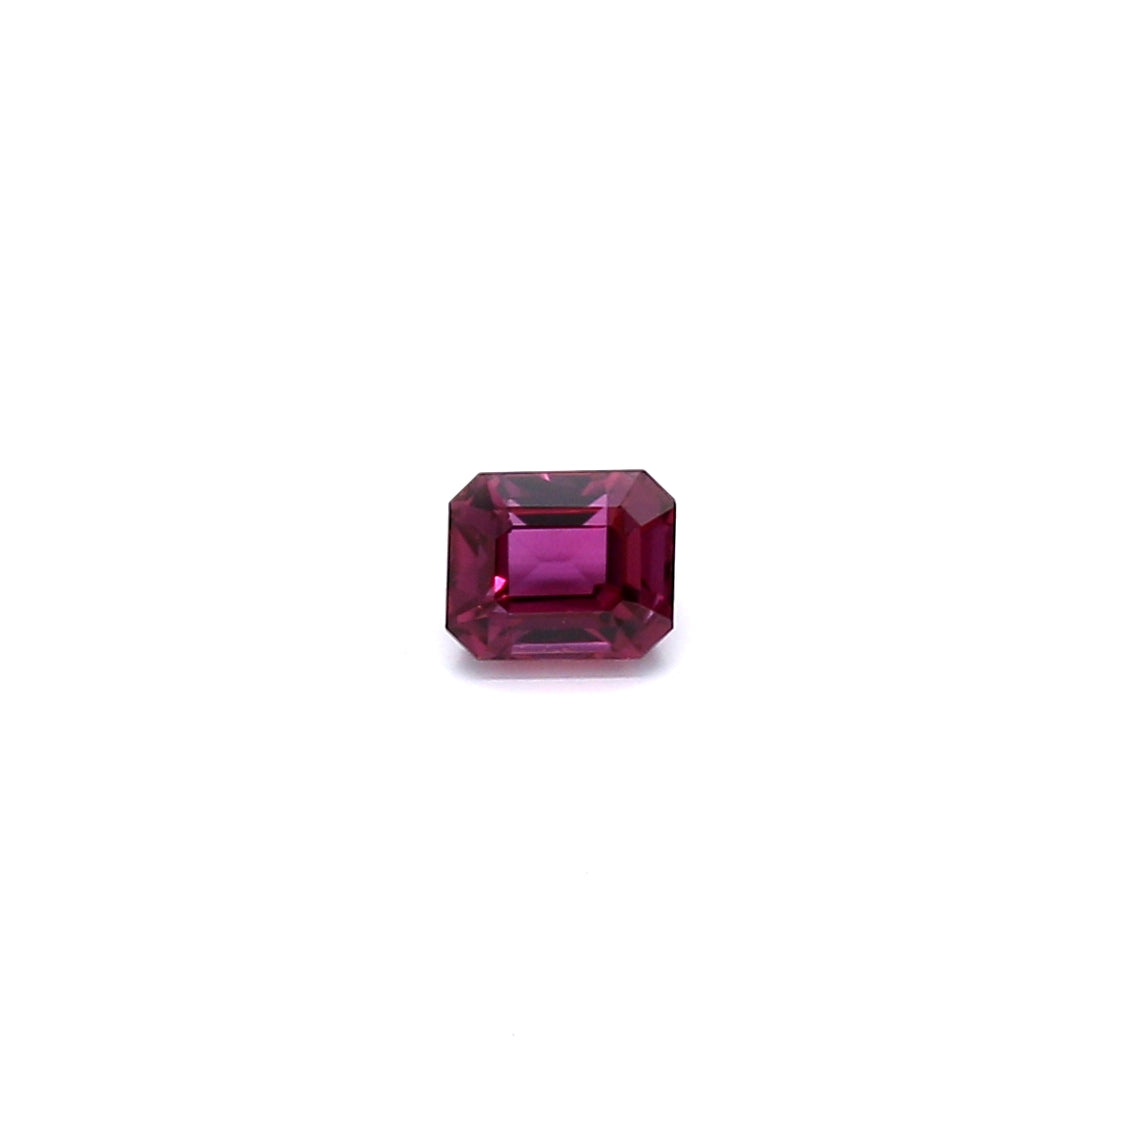 0.35ct Pinkish Red, Octagon Ruby, Heated, Thailand - 3.97 x 3.30 x 2.50mm